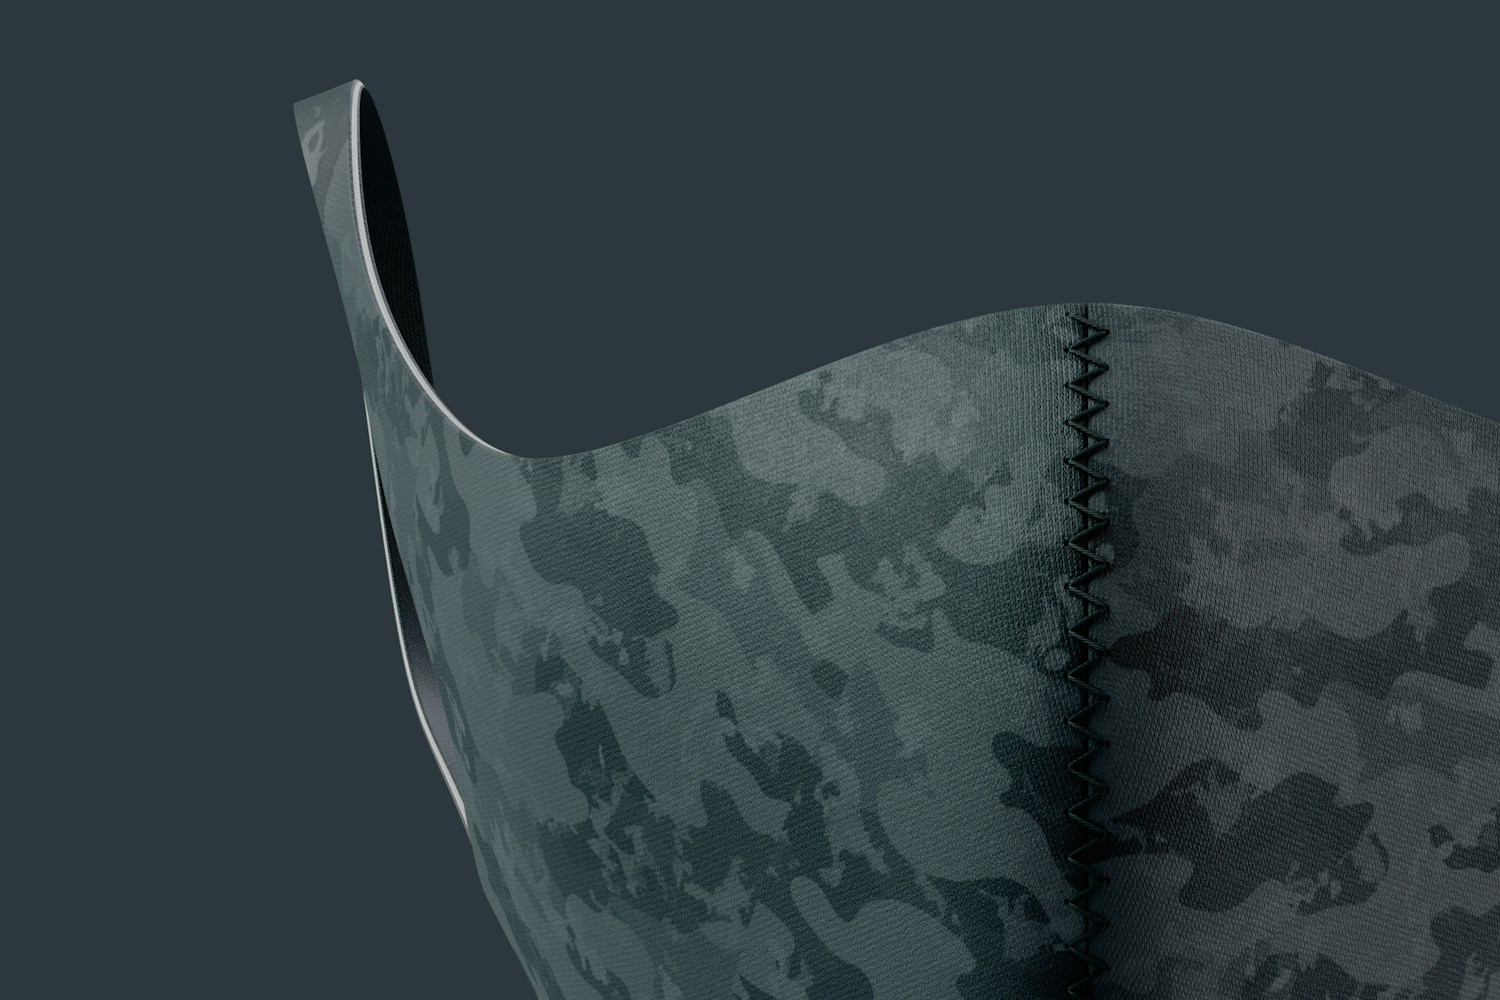 Neoprene Guard Face Mask Mockup, Front View 02